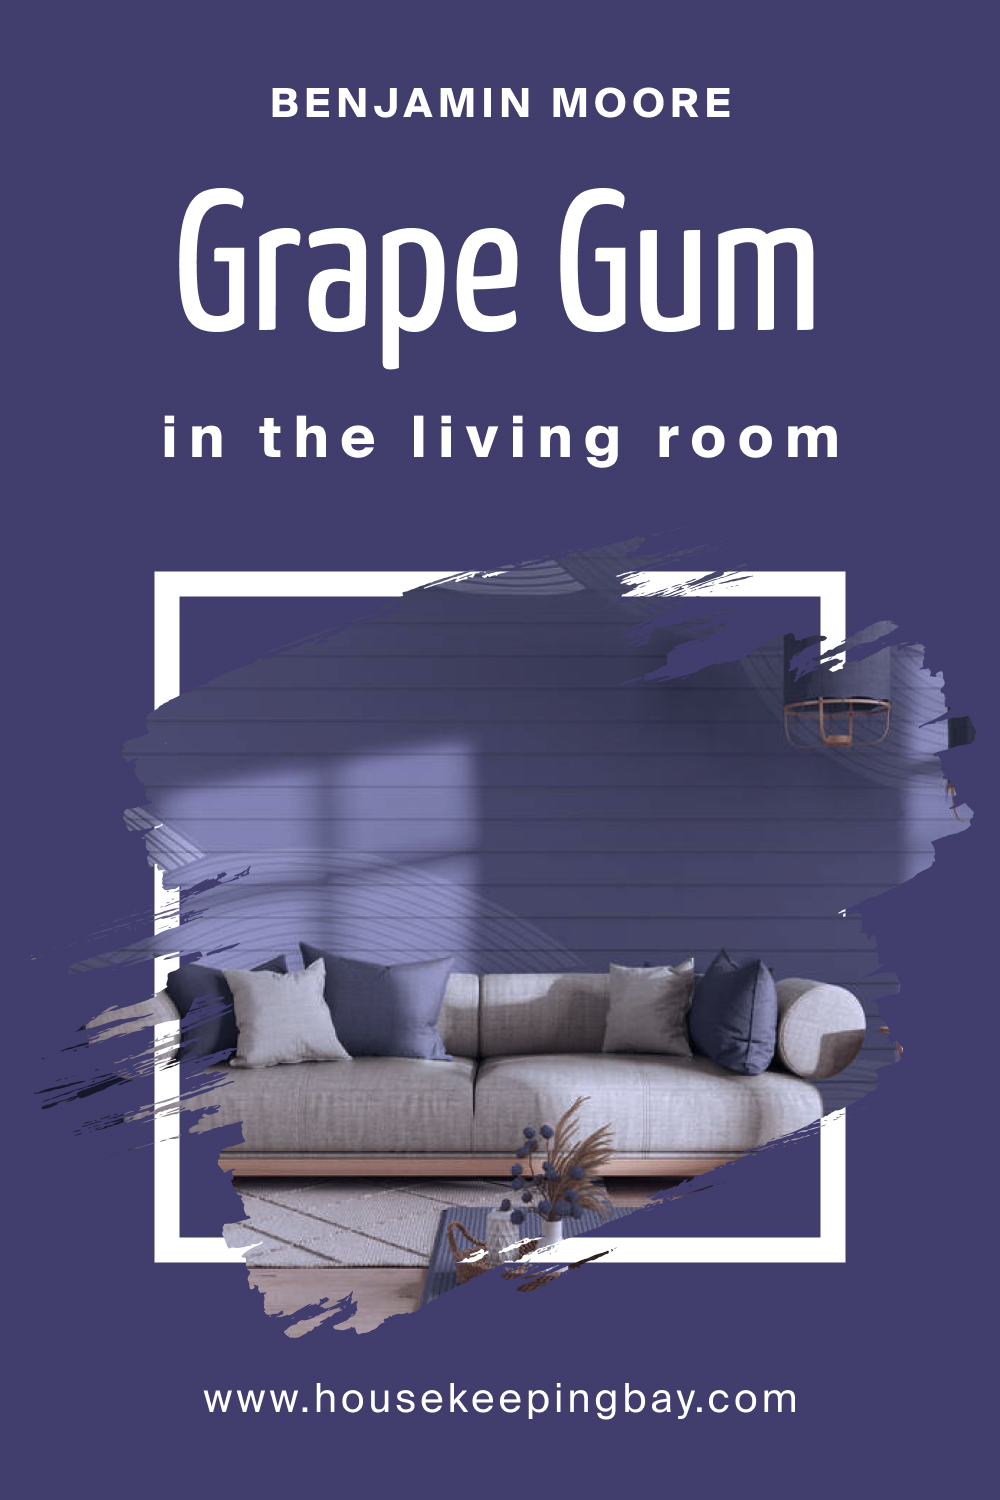 How to Use BM Grape Gum 2068-20 in the Living Room?